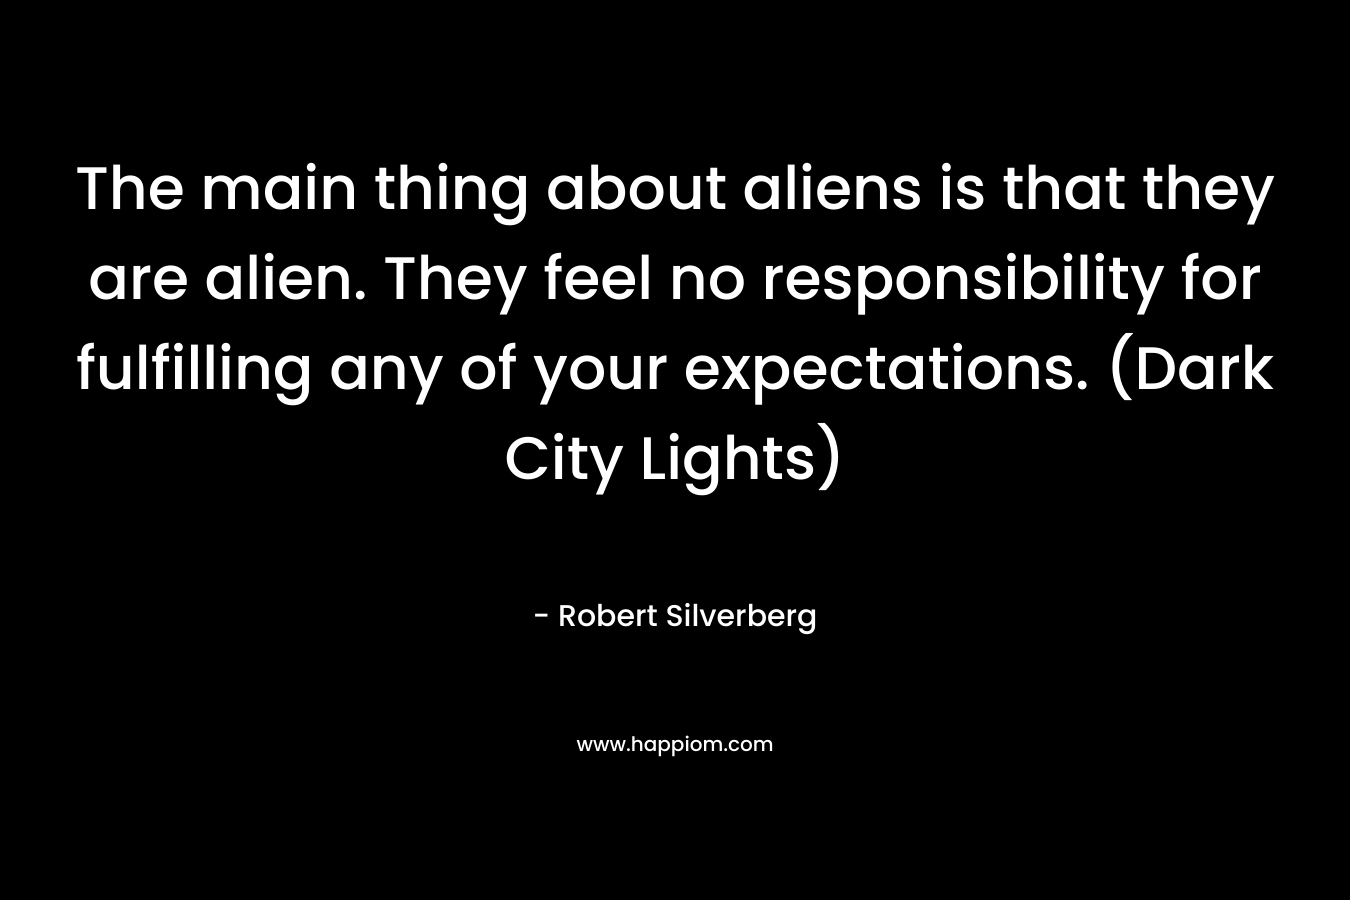 The main thing about aliens is that they are alien. They feel no responsibility for fulfilling any of your expectations. (Dark City Lights)